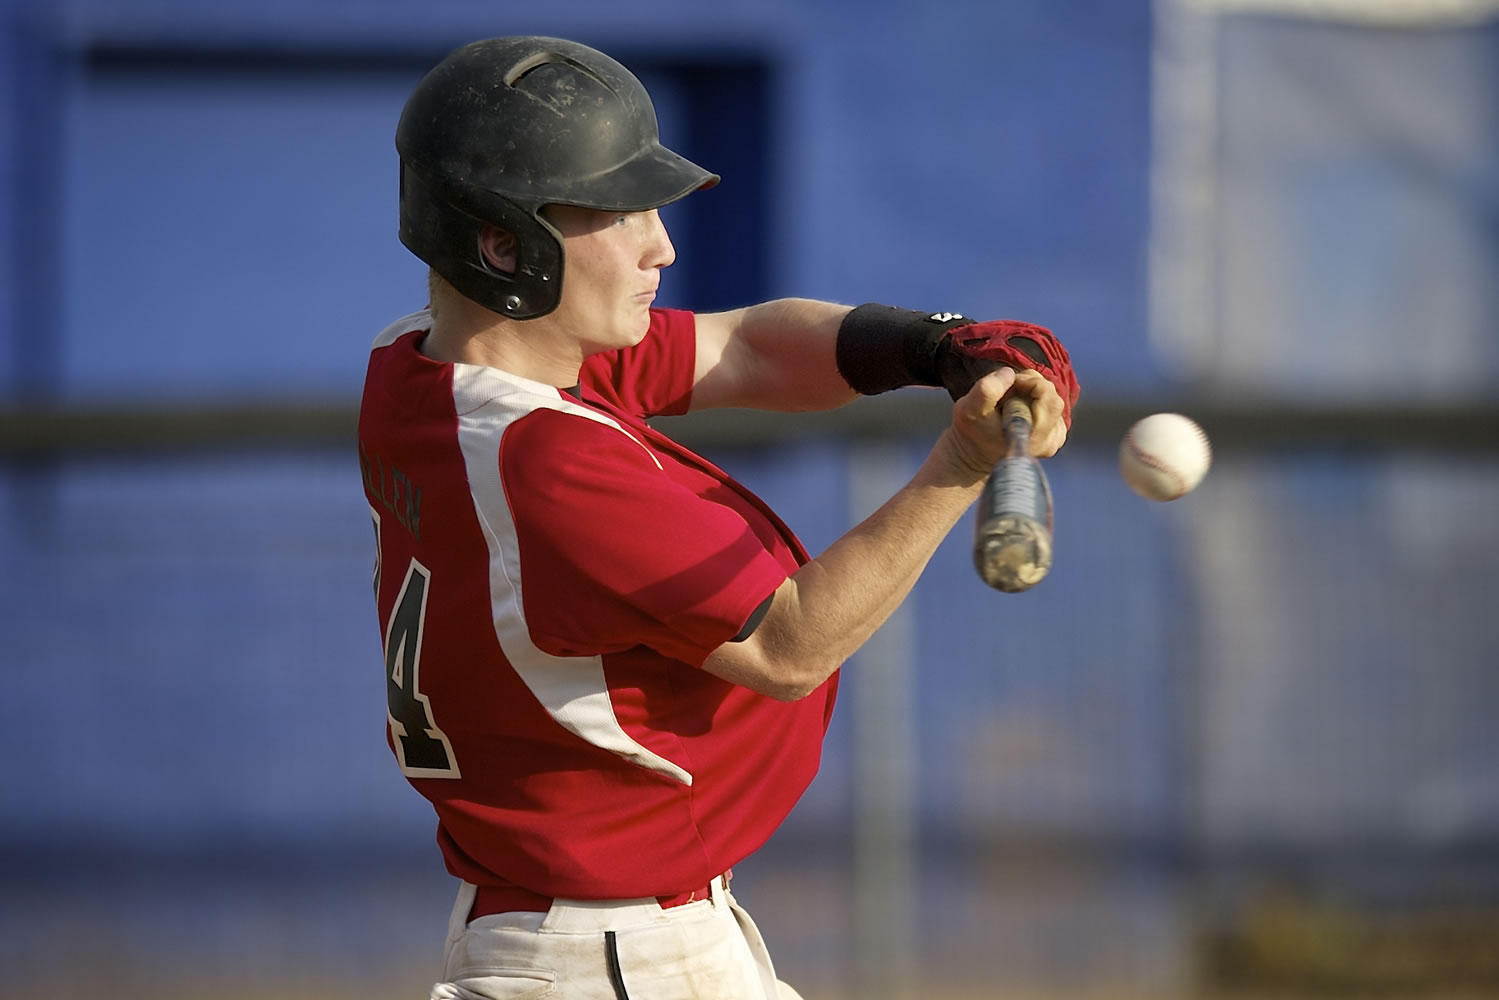 Dawson Allen of Central Vancouver hits an RBI single in the bottom of the seventh inning Wednesday.